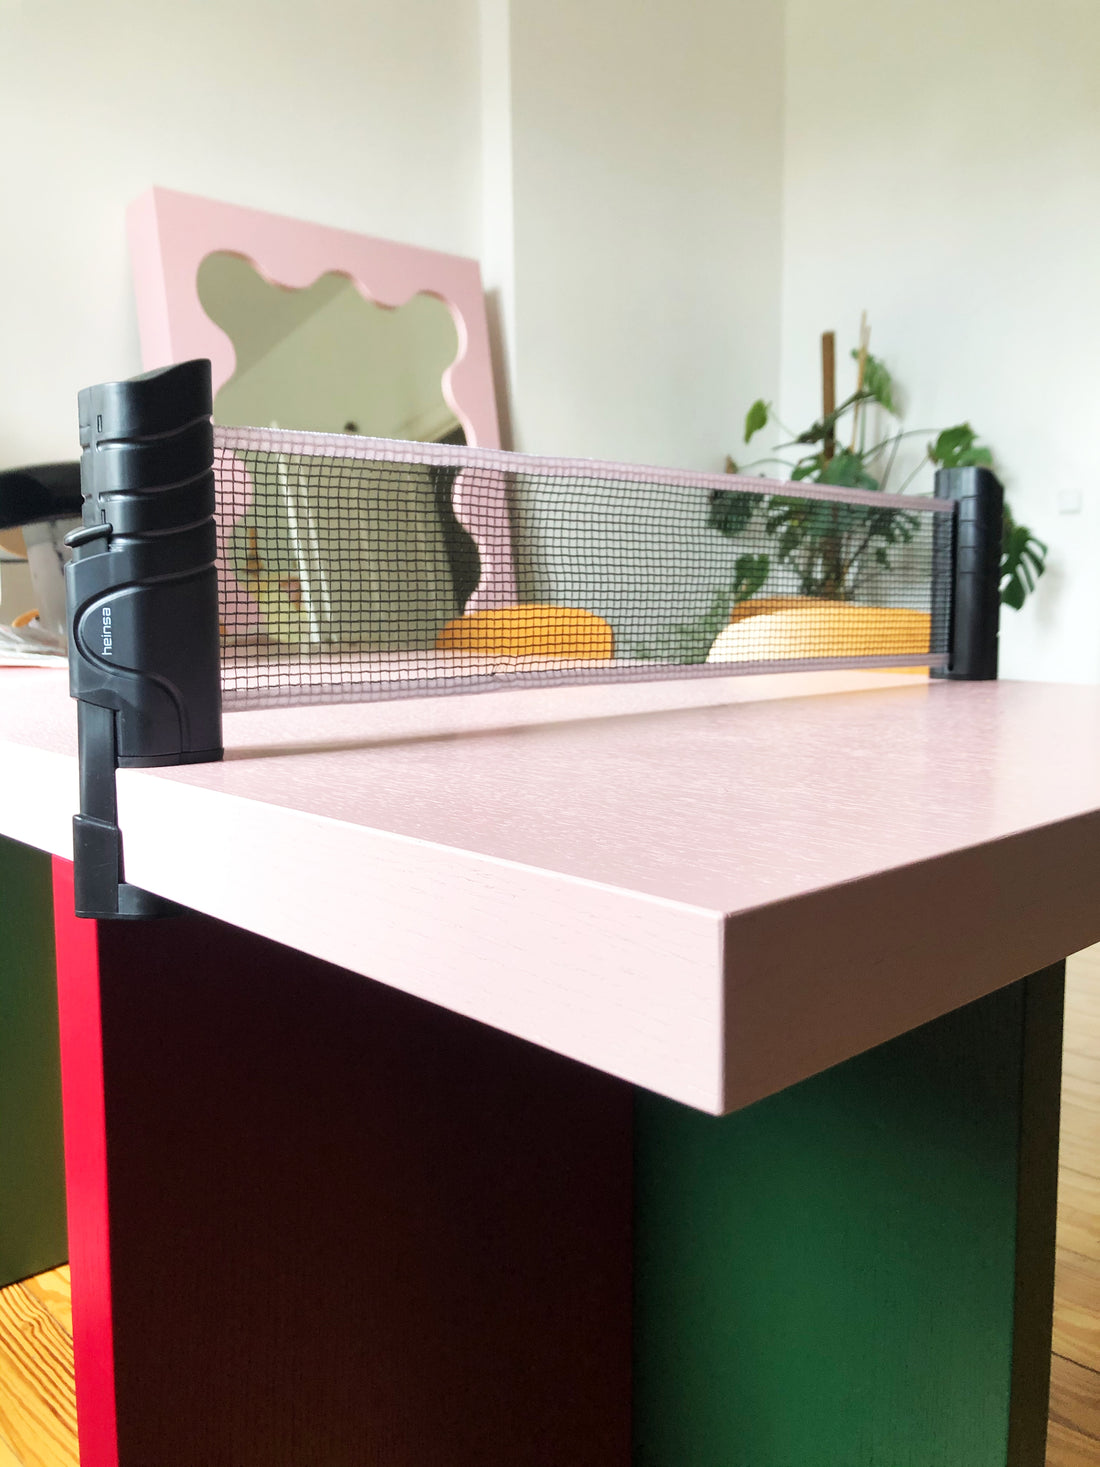 heinsa mobile table tennis net to extend for every table